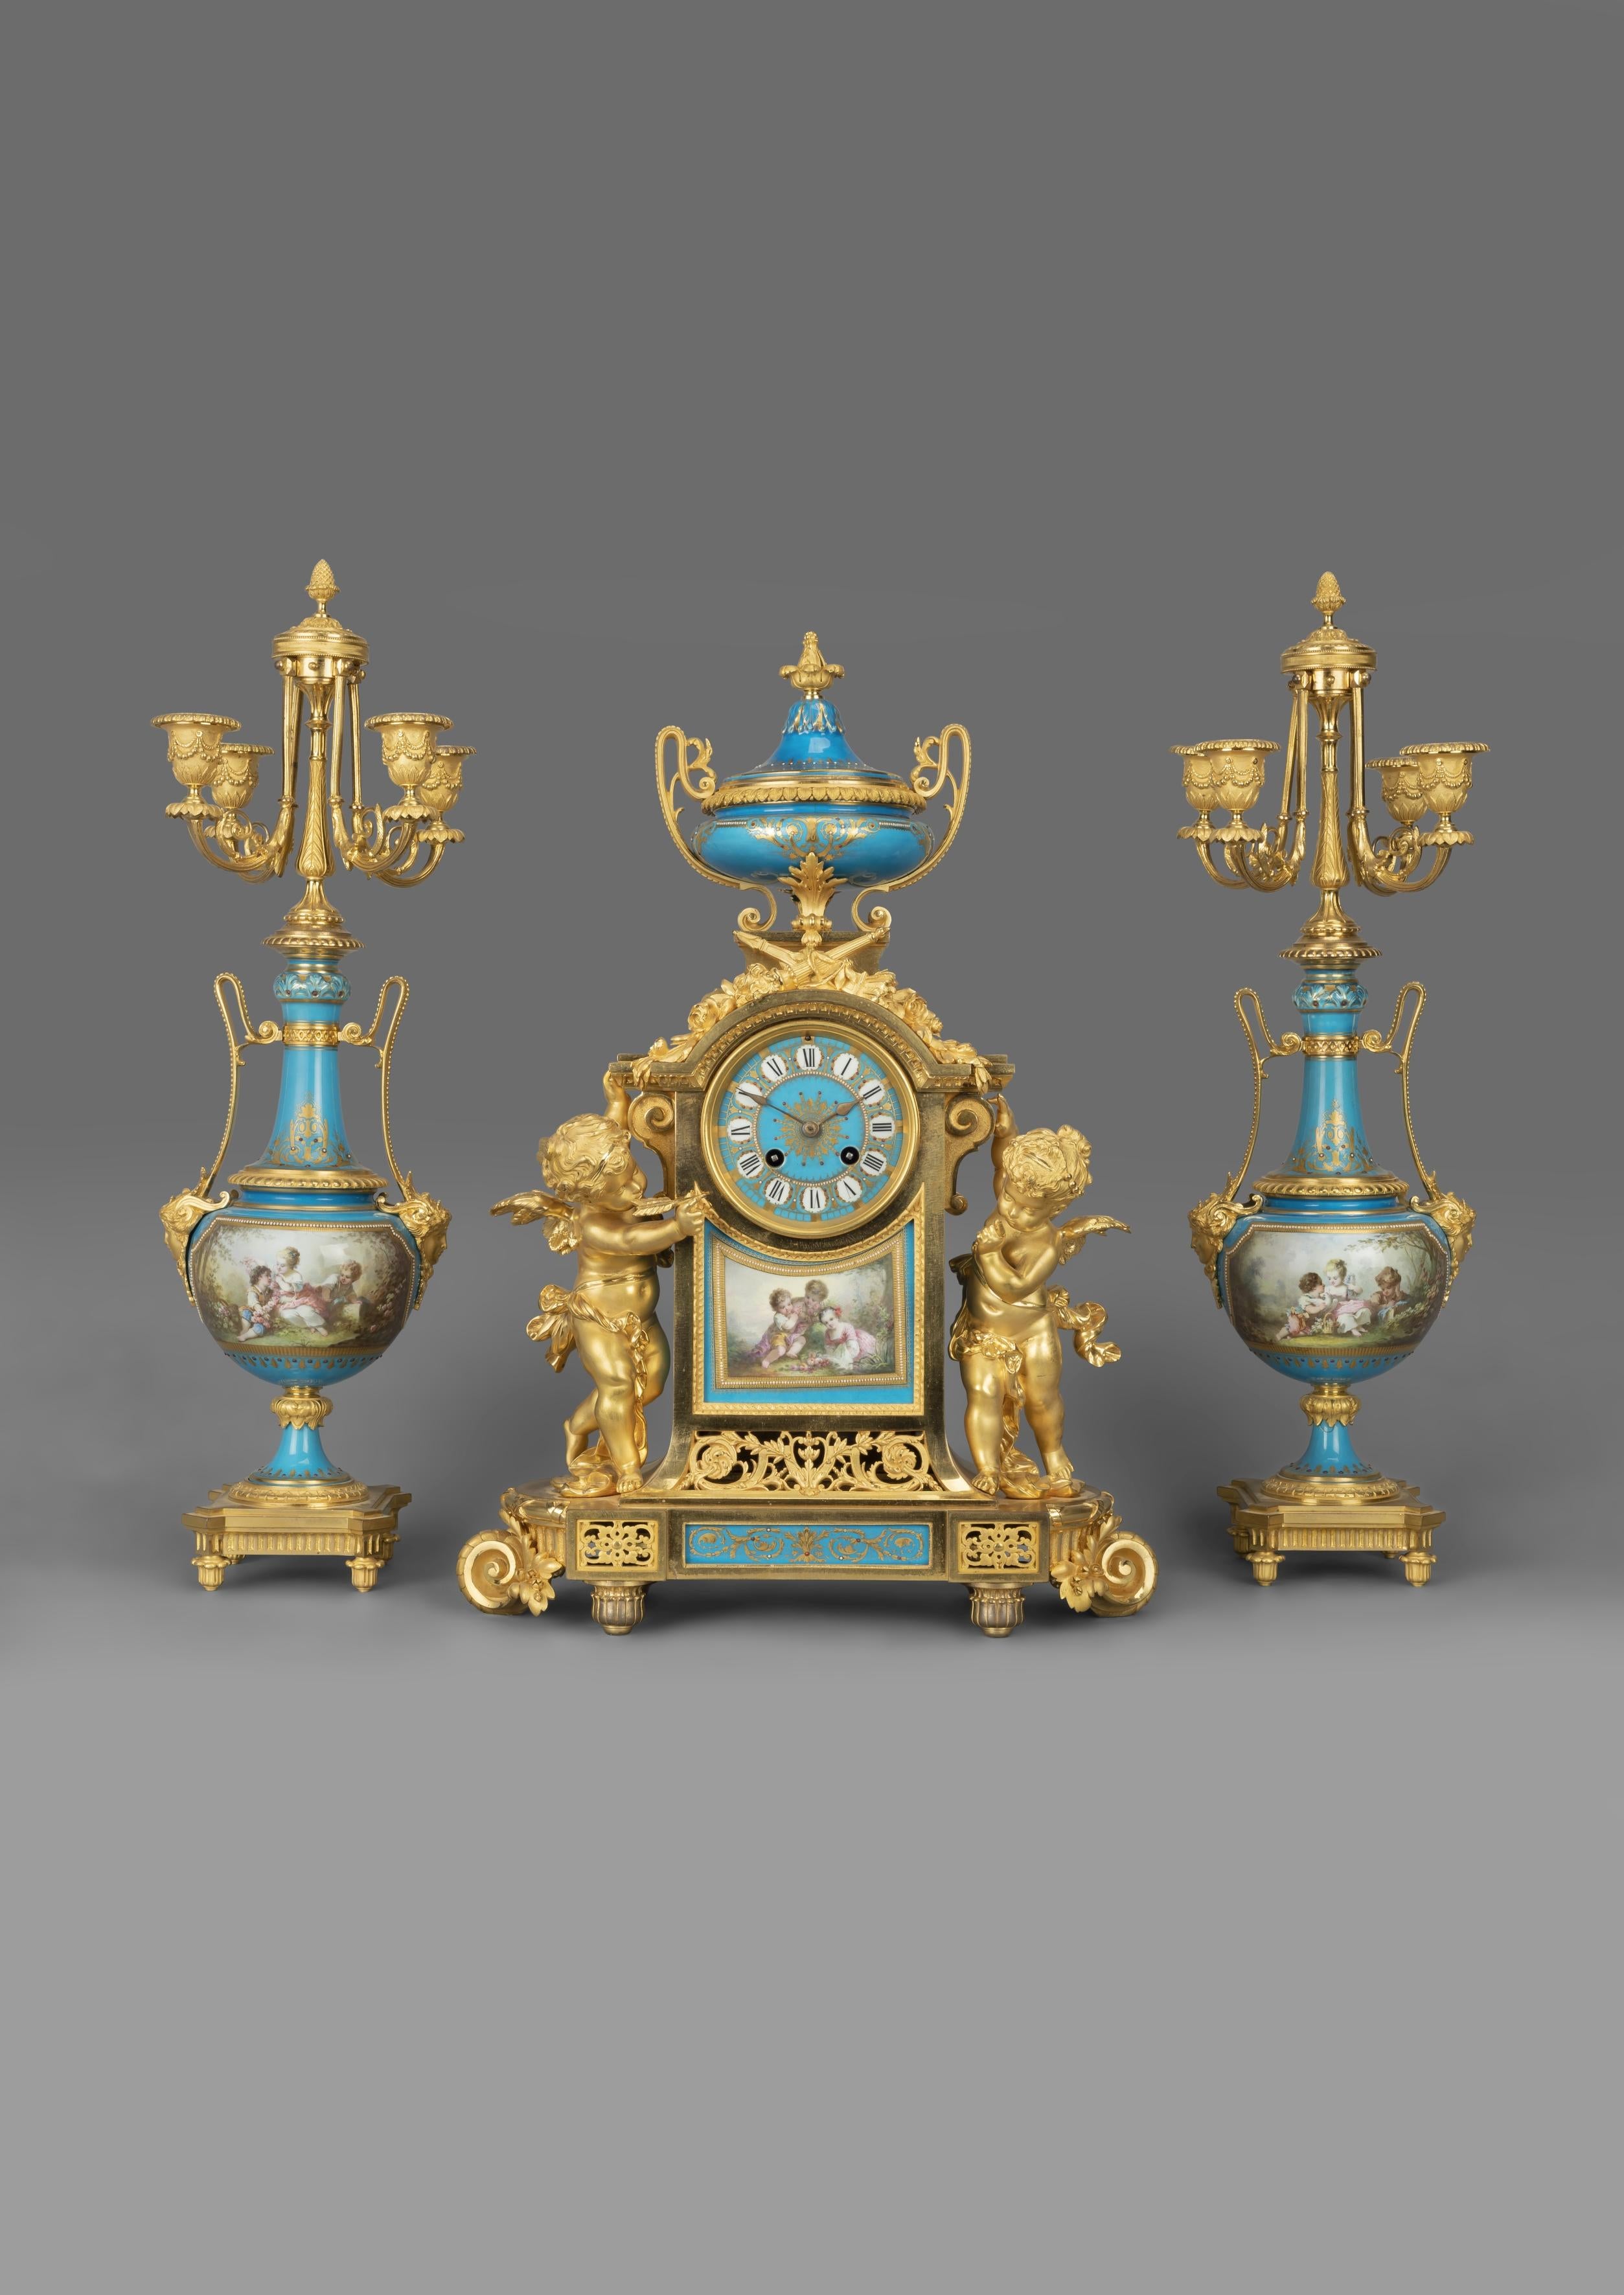 An important Napoléon III gilt bronze and turquoise porcelain clock garniture.

French, circa 1870. 

This very fine clock garniture comprises of a clock and a pair of vase form candelabra. 

The finely cast and chiselled gilt bronze case has